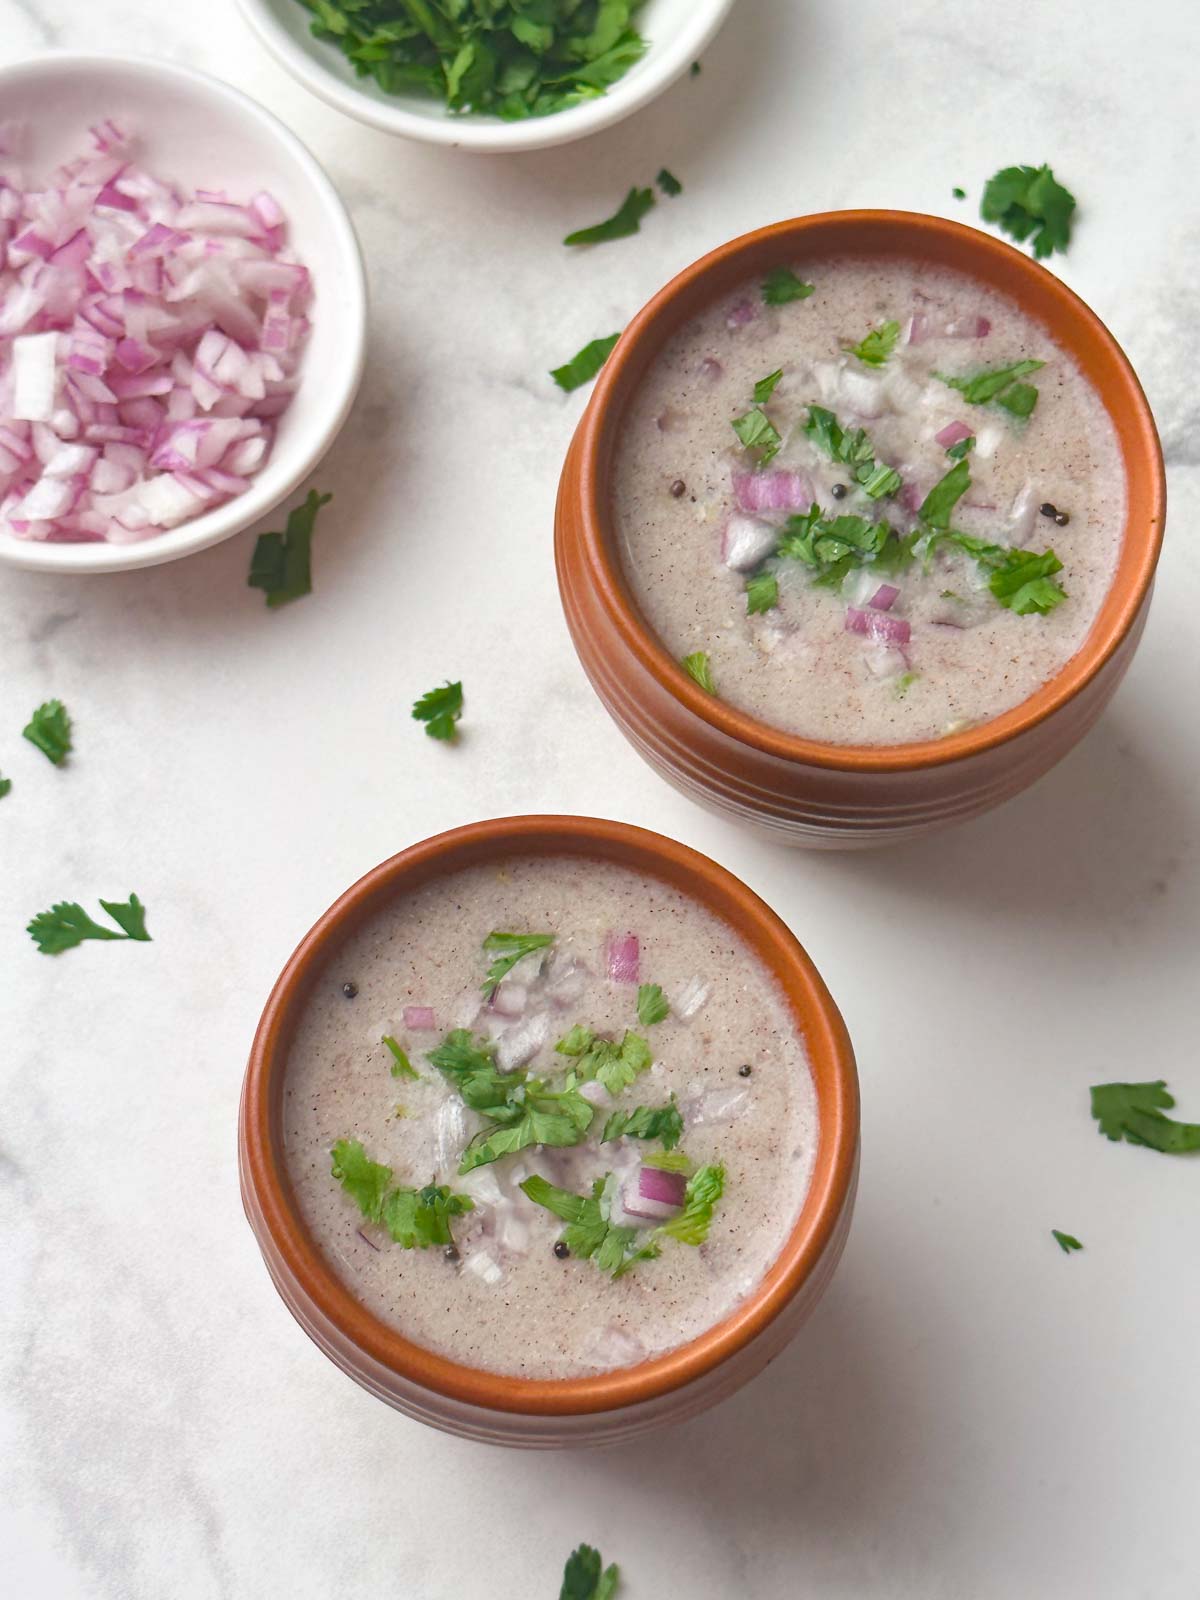 ragi ambali served in serving glasses garnished with onions and coriander